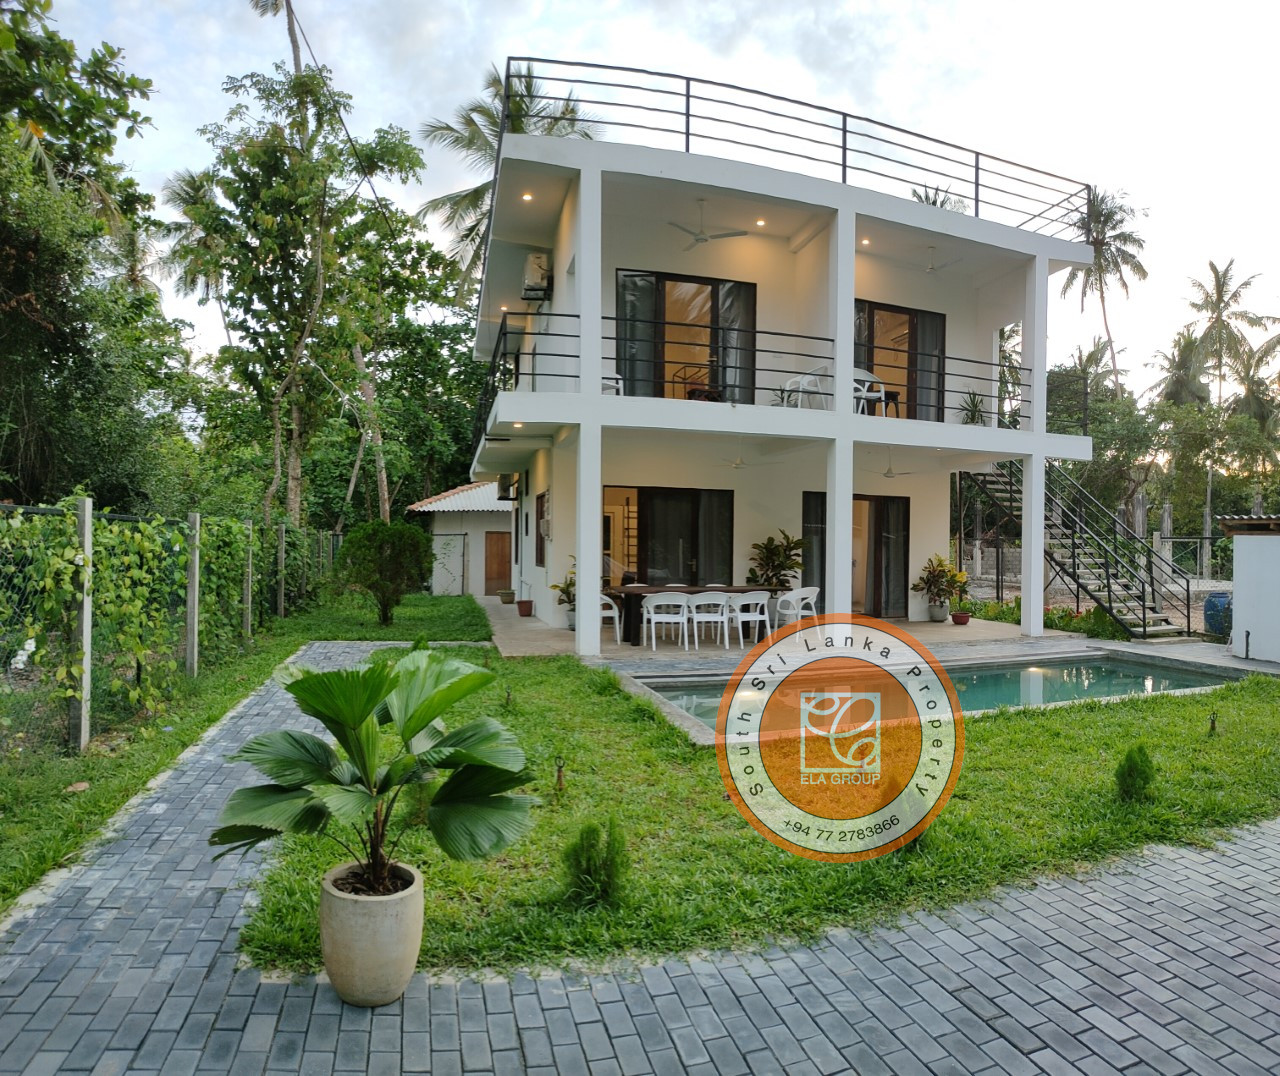 Comfortable budget apartments or villa on the best beach